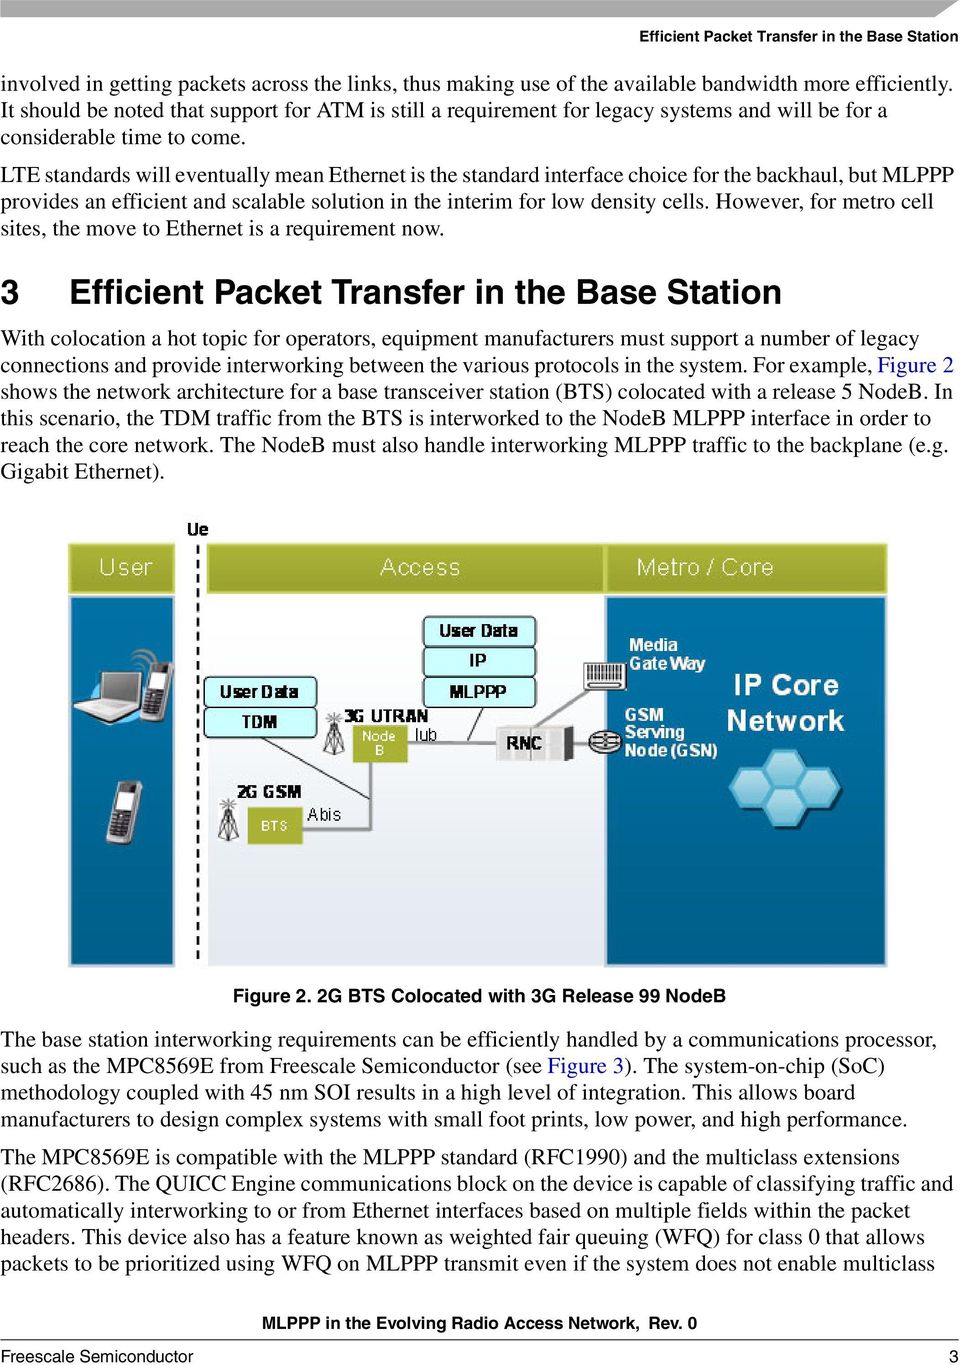 LTE standards will eventually mean Ethernet is the standard interface choice for the backhaul, but MLPPP provides an efficient and scalable solution in the interim for low density cells.